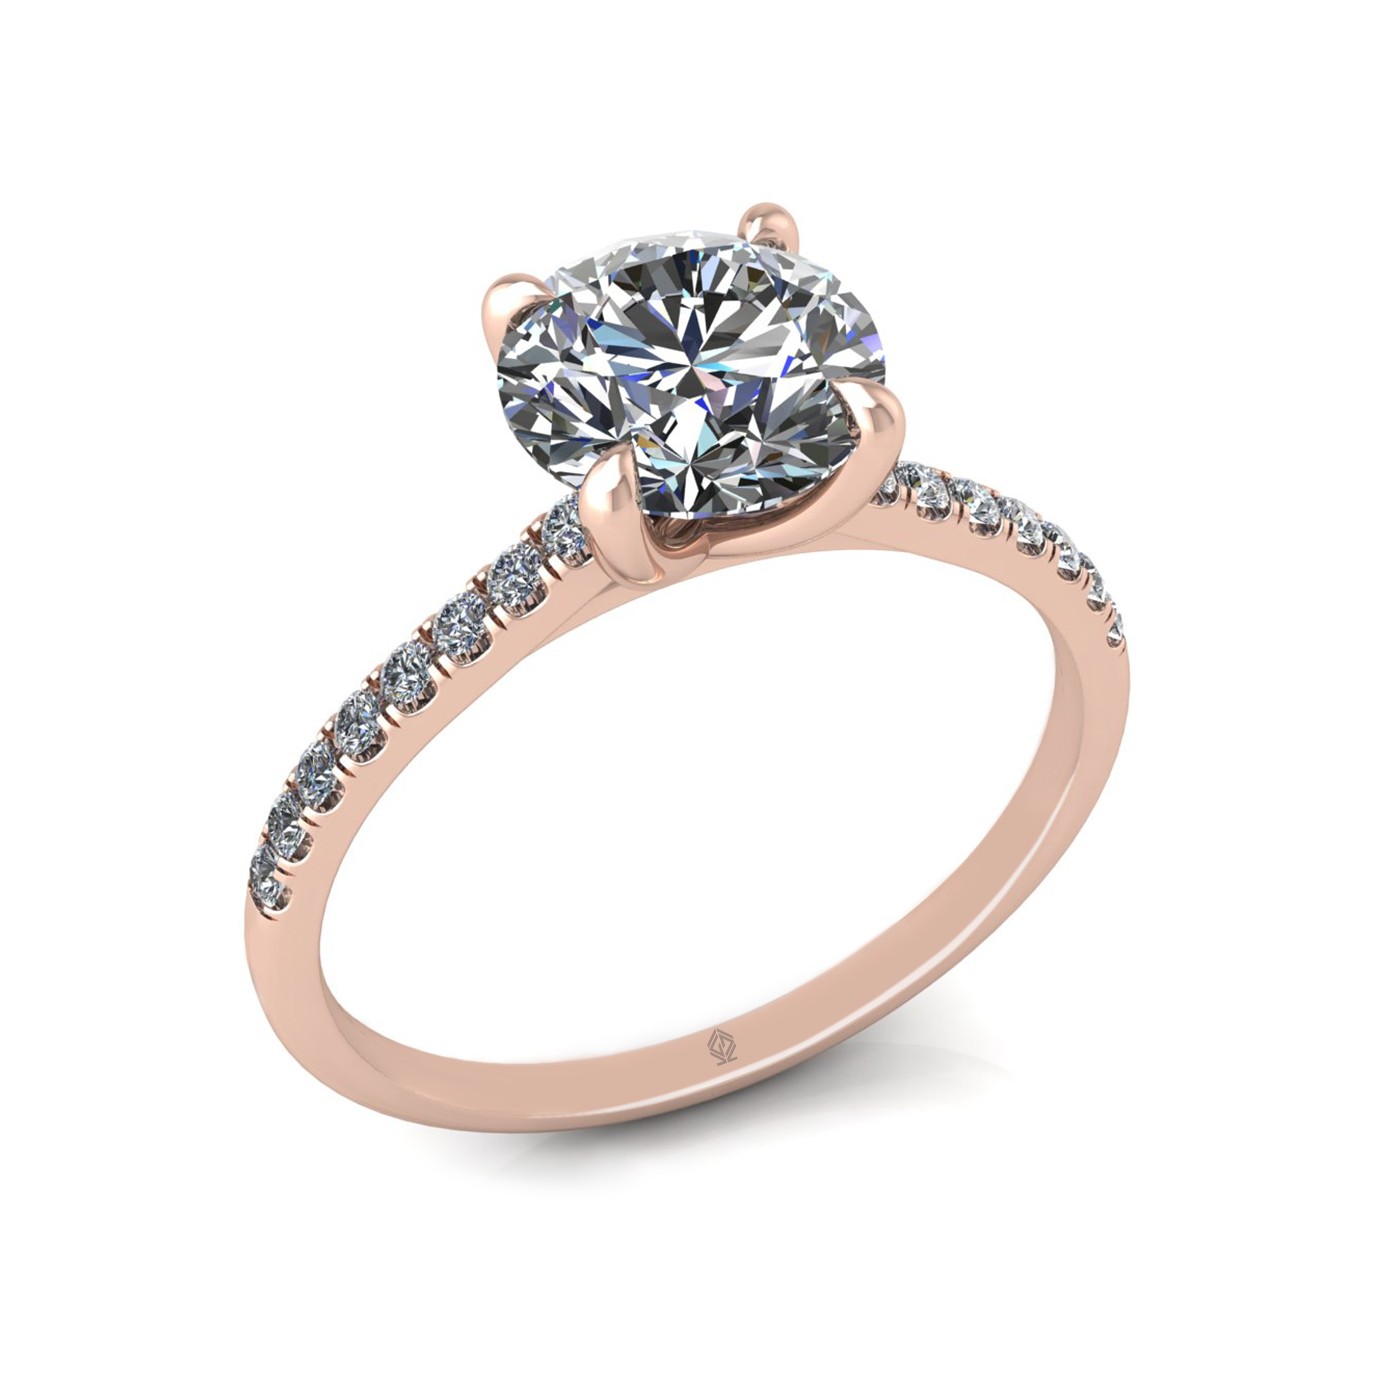 18k rose gold 1.5ct 4 prongs round cut diamond engagement ring with whisper thin pavÉ set band